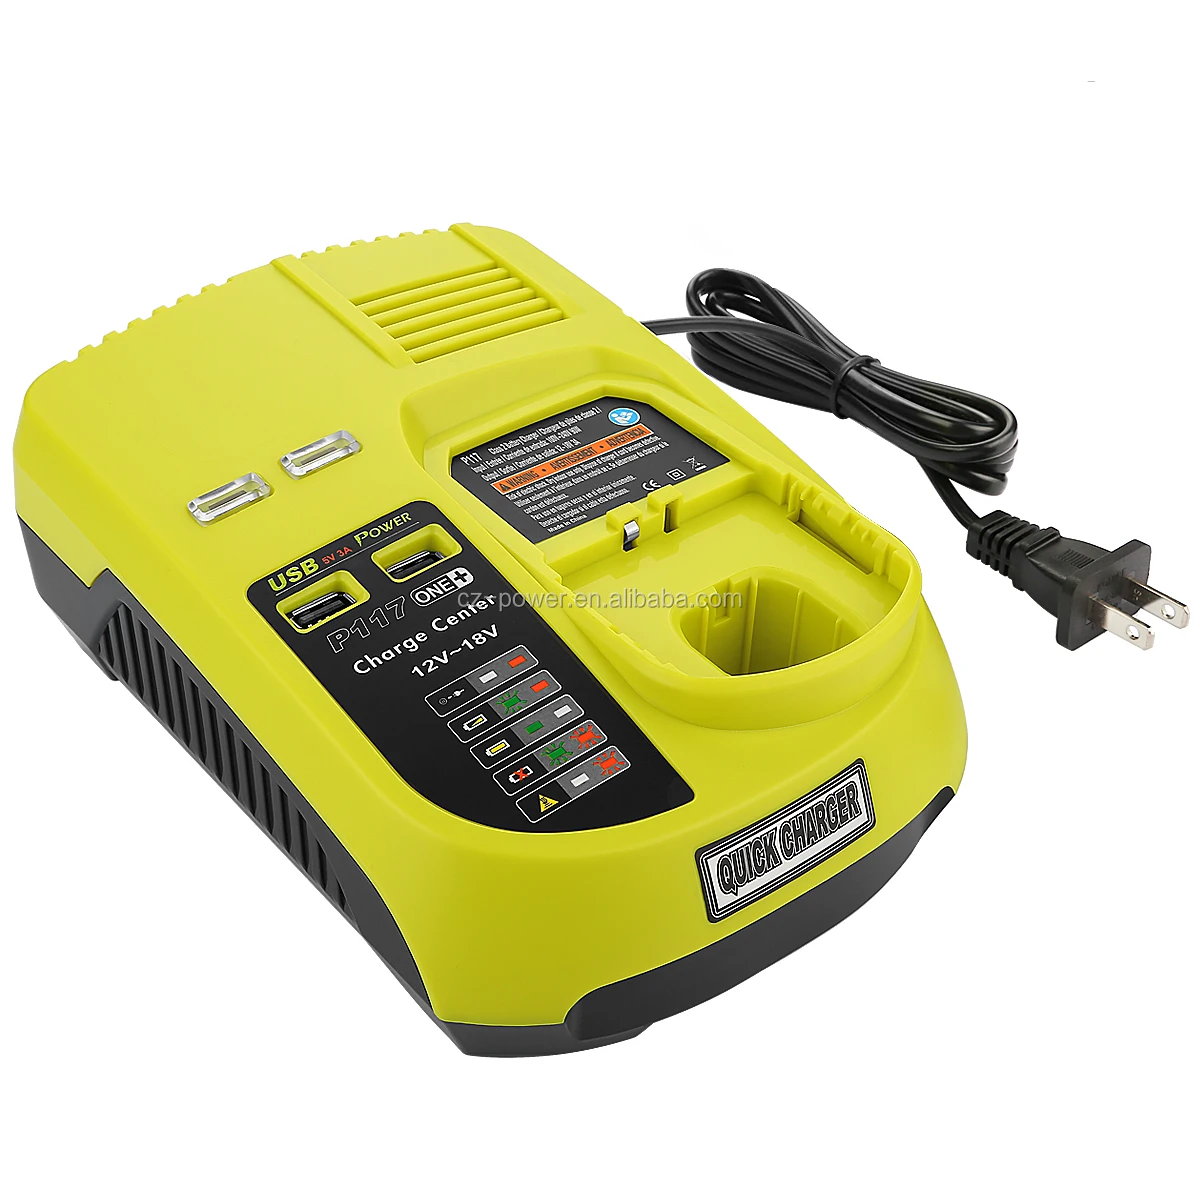 Ryobi P117 18V Dual-Chemistry Battery Charger - 2-Pack (140173021) for sale  online